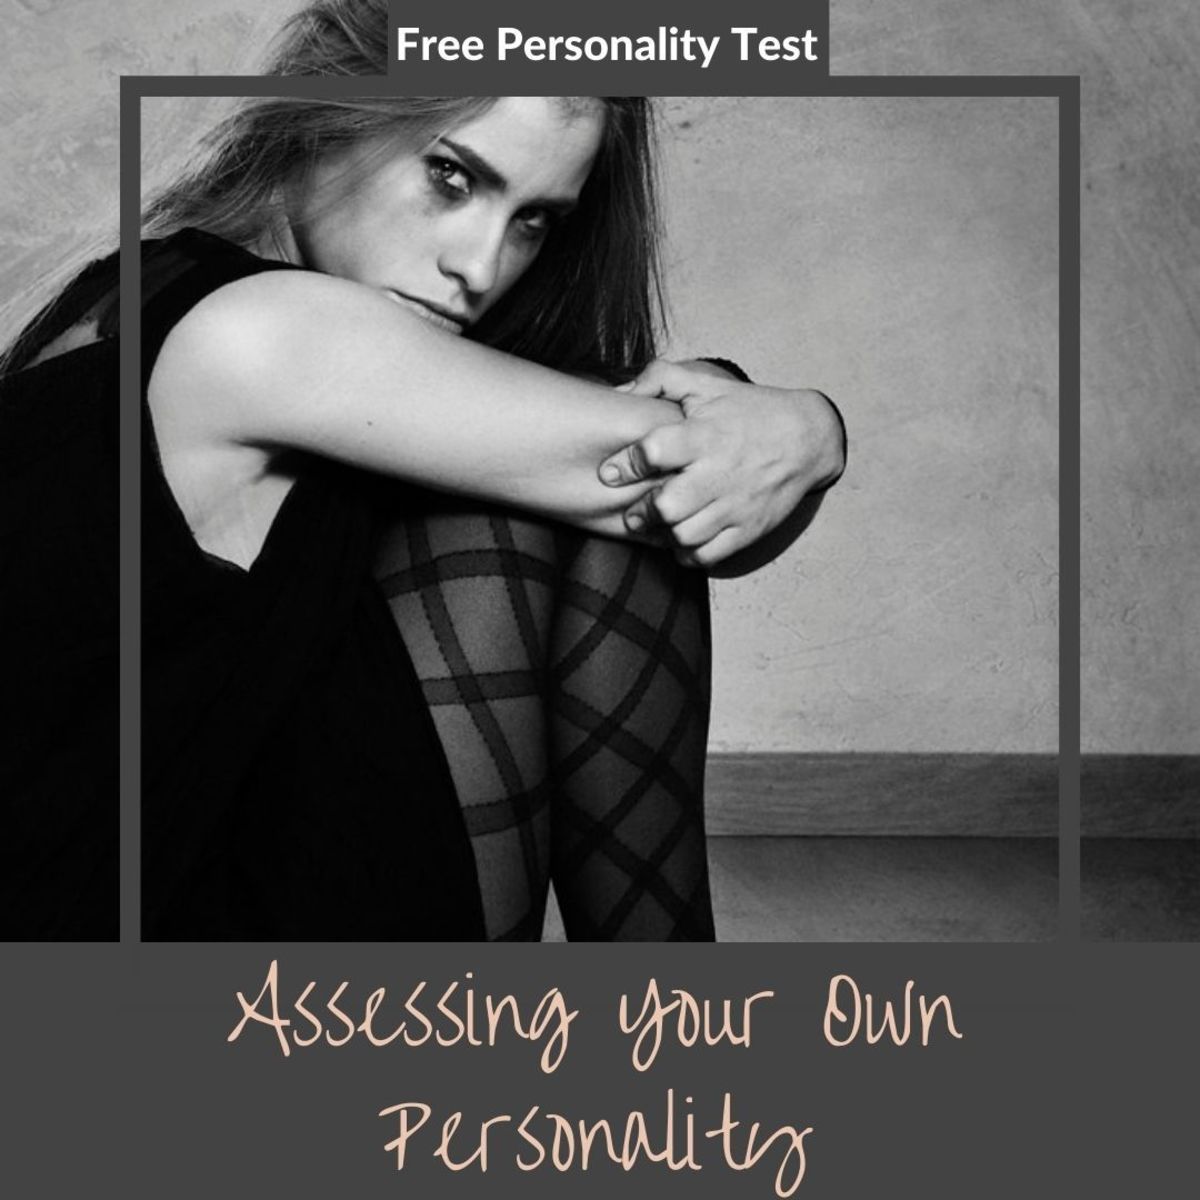 Check your personality type by doing these free personality tests